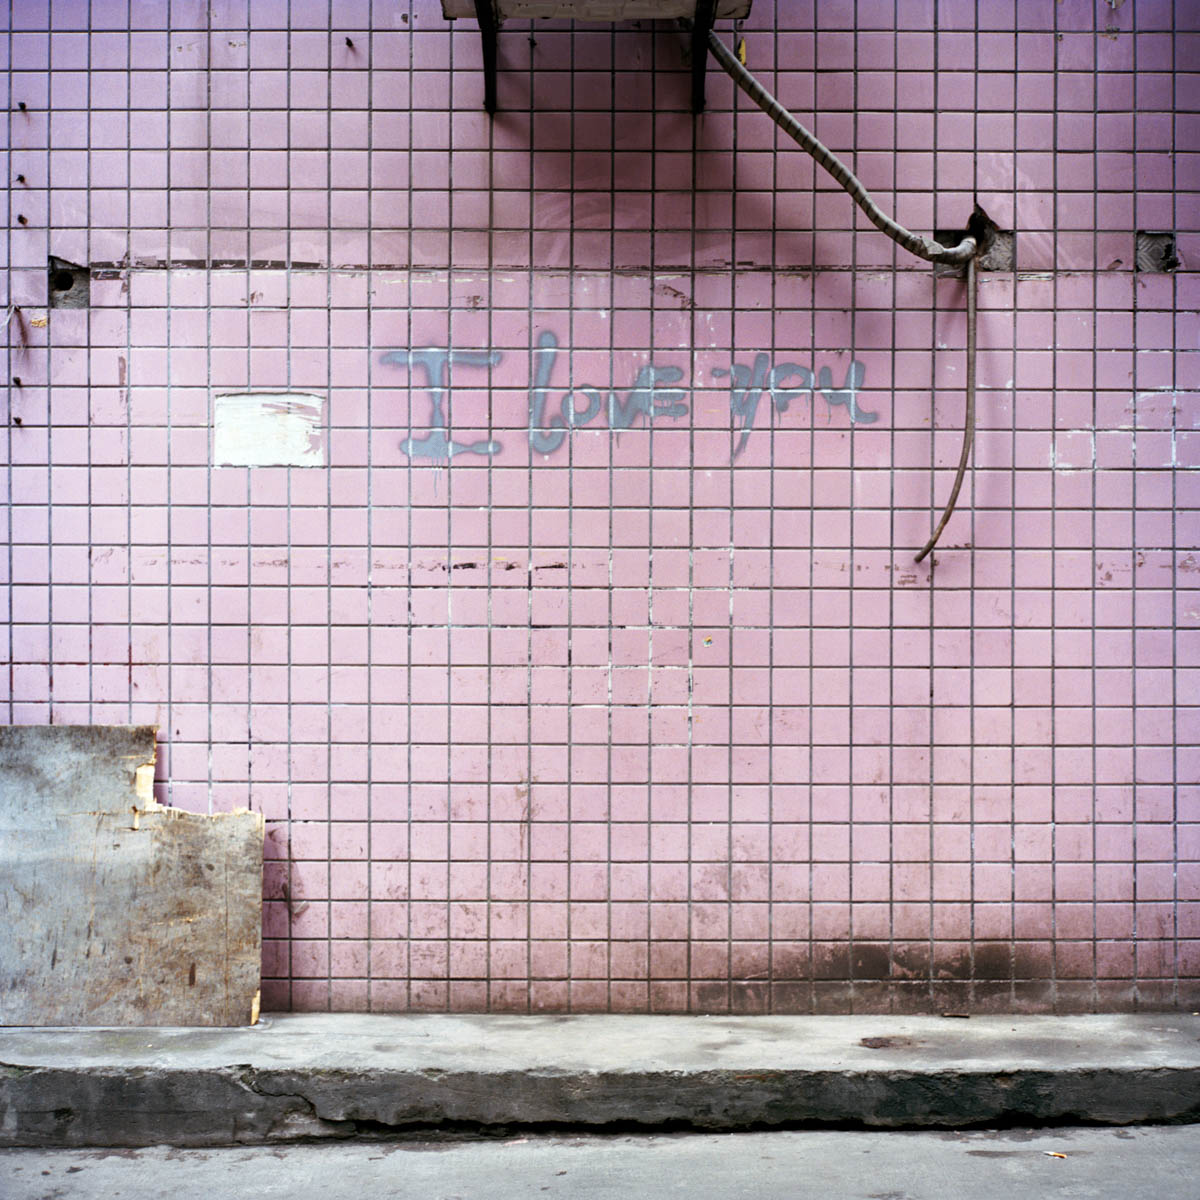 Jia Yue - Yue just started working a the Metropolitain Art Salon. Her main job is washing hair. Her employee does not want us to visit the dormitory where Yue lives, not far from the salon. She points out this pink-tiled building. Chengdu, Sichuan Province, China, April 2012. - Copyright © © S. Borcard - N. Metraux - Chengdu - Sichuan Province - China - <A href="https://maps.google.com/?ll=30.662428,104.066055&z=16" target="_blank">(Map Jia Yue)</A>